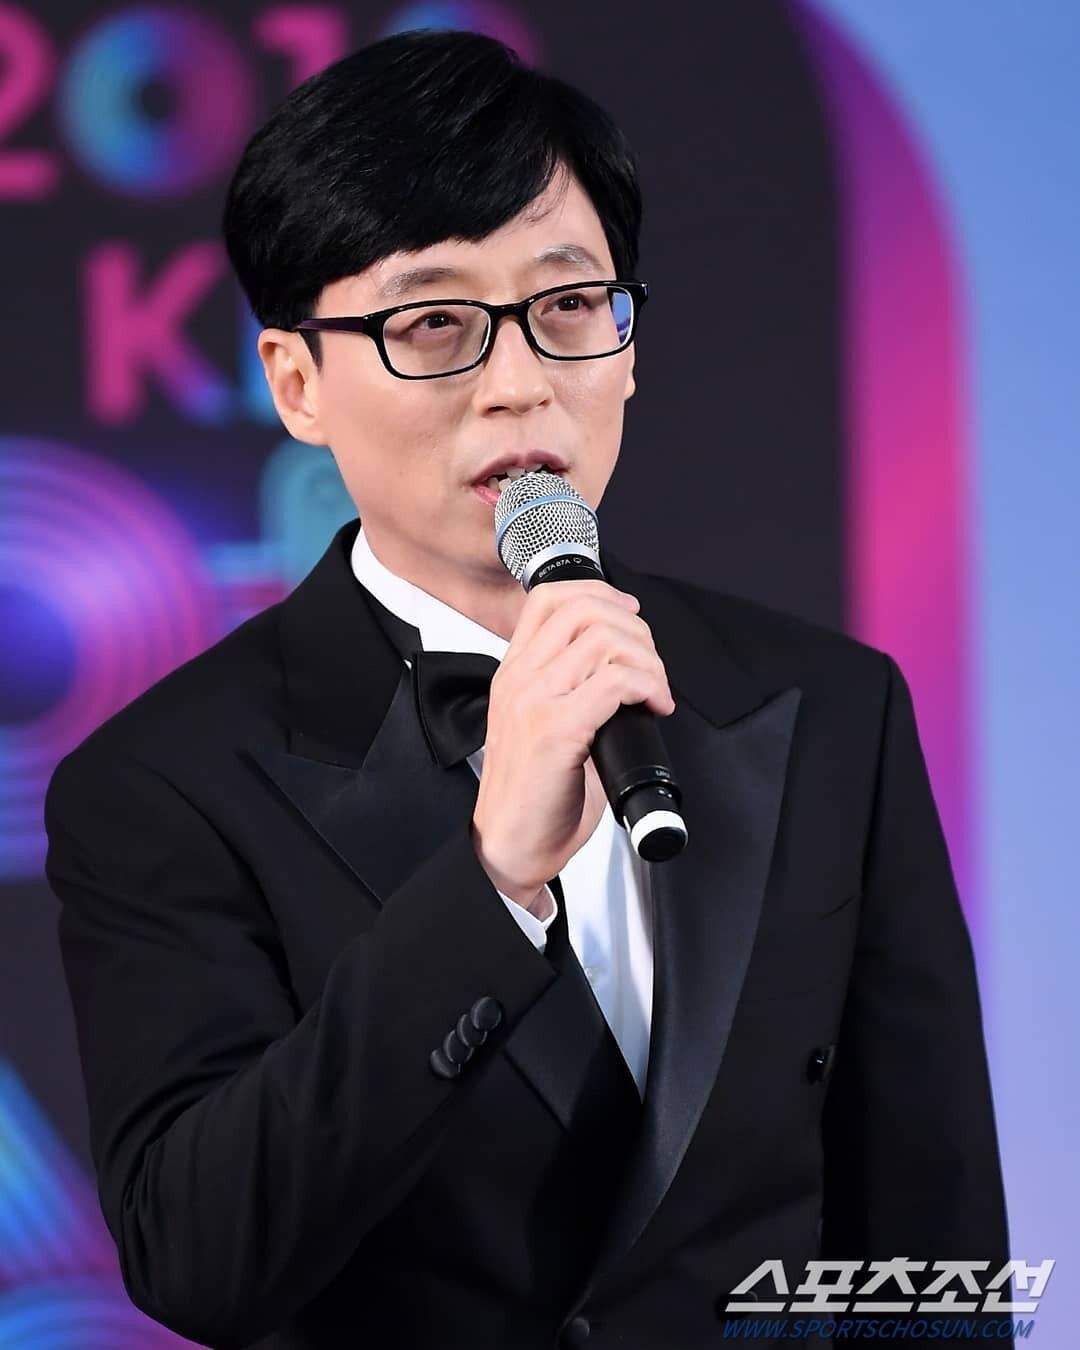 Yoo Jae-suk is a Korean national treasure after 30 years in the business, from hosting TV shows to singing and dancing along side the best. Photo: @yoojaesuk0814/Instagram